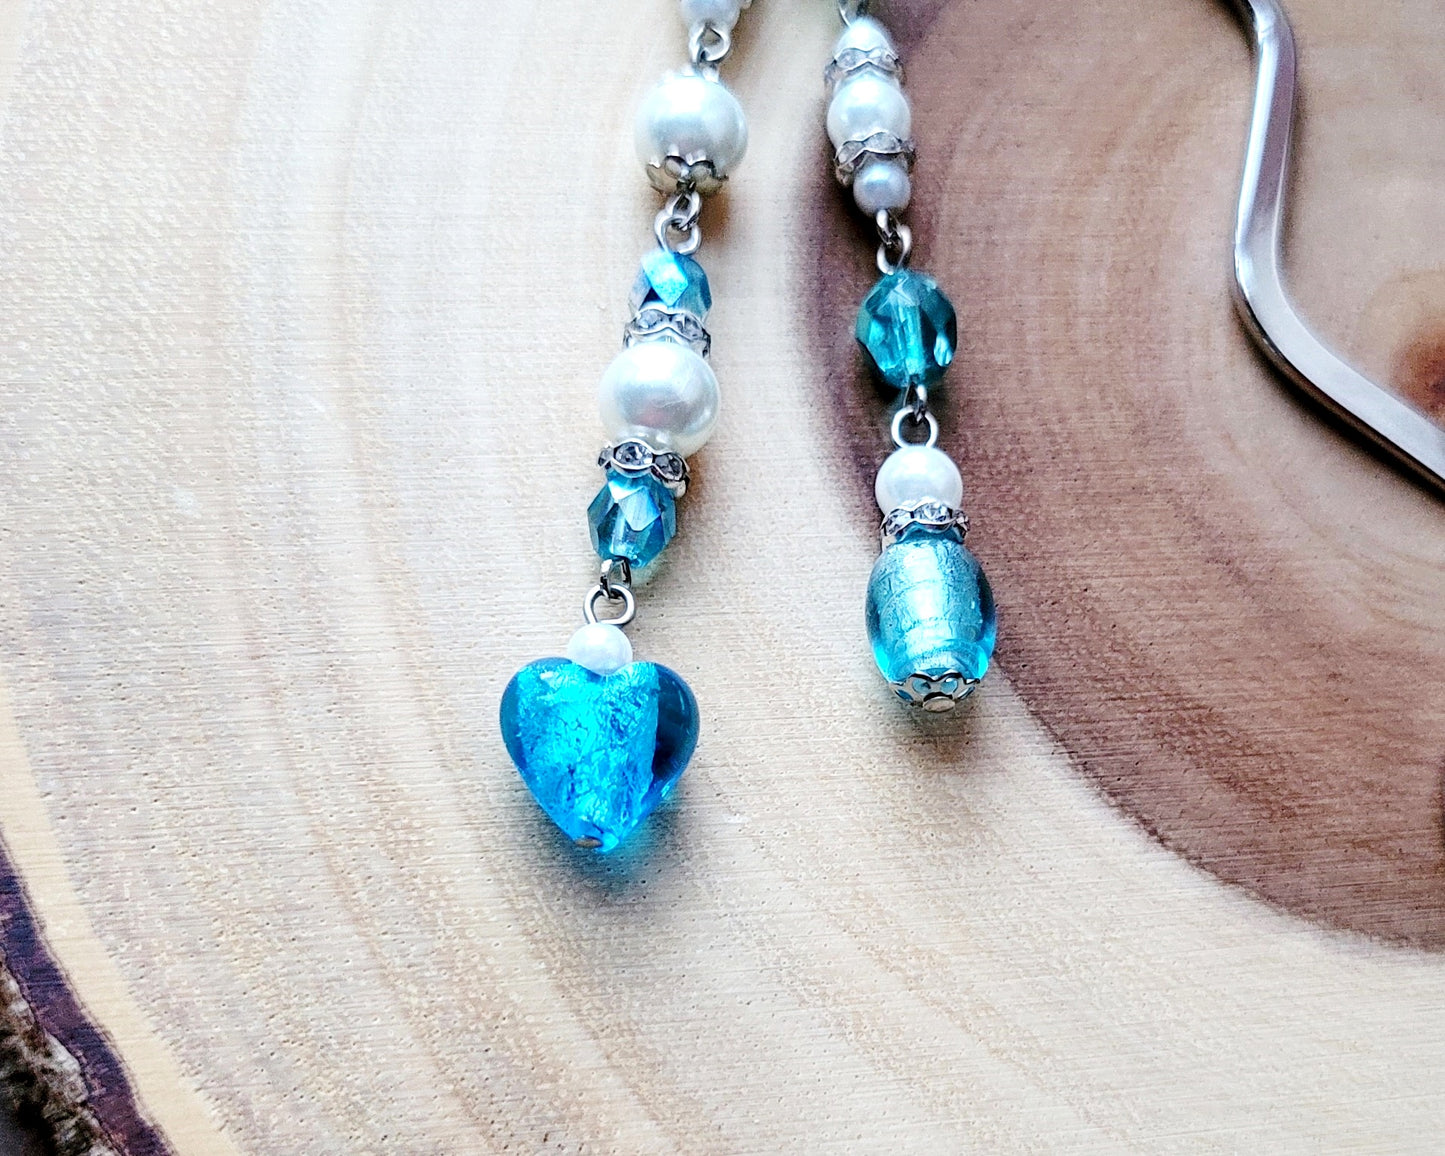 Deluxe Blue Heart, Sparkle and Pearl Beaded Bookmark, Blue Foil Glass Heart, two strands of Pearls, Crystal & Czech Fire Polished Glass